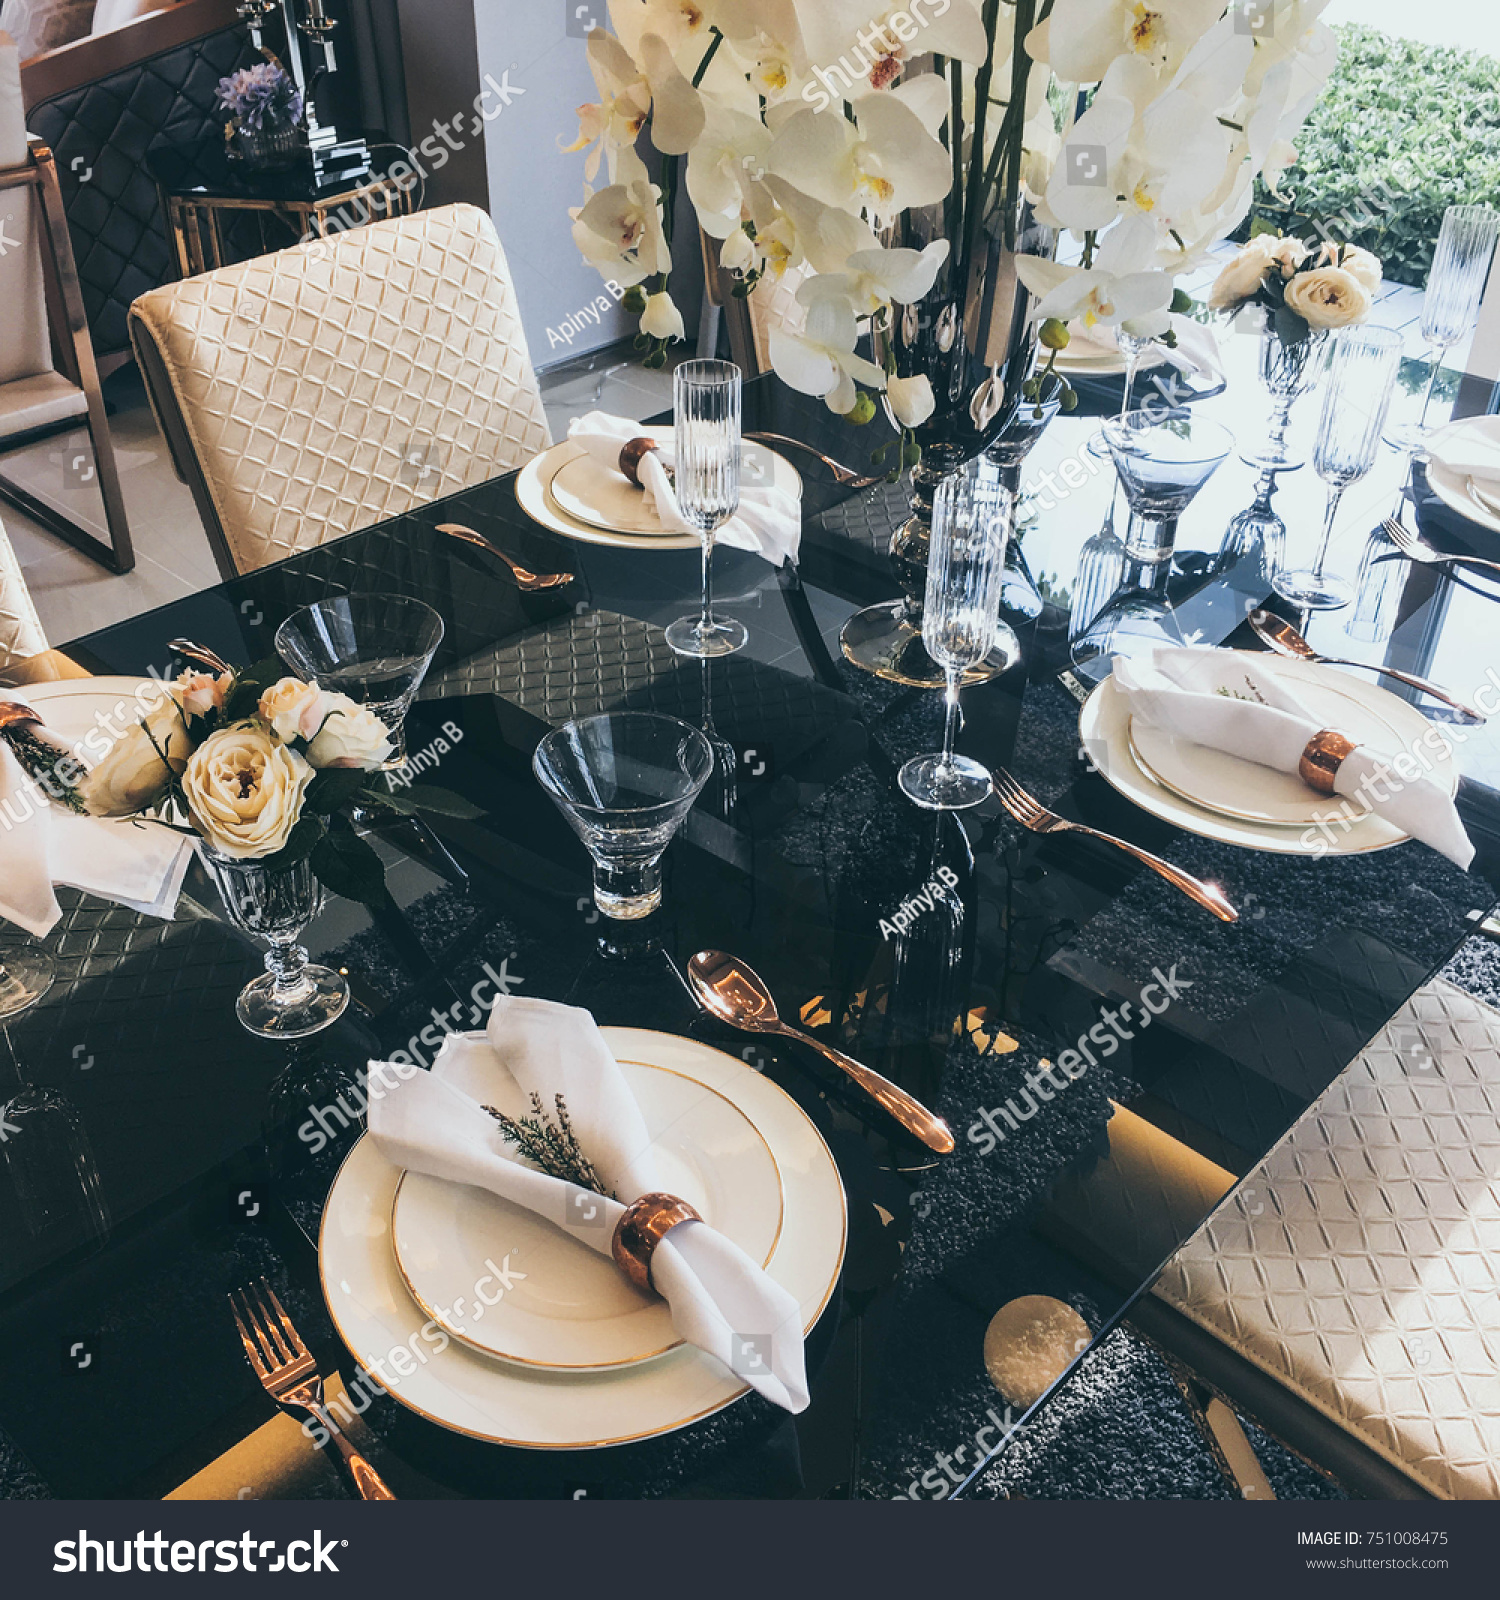 DIY BLACK AND GOLD TABLE SETTING, BLACK AND GOLD WEDDING, BLACK AND GOLD  TABLE SETTING, DOLLAR TREE 